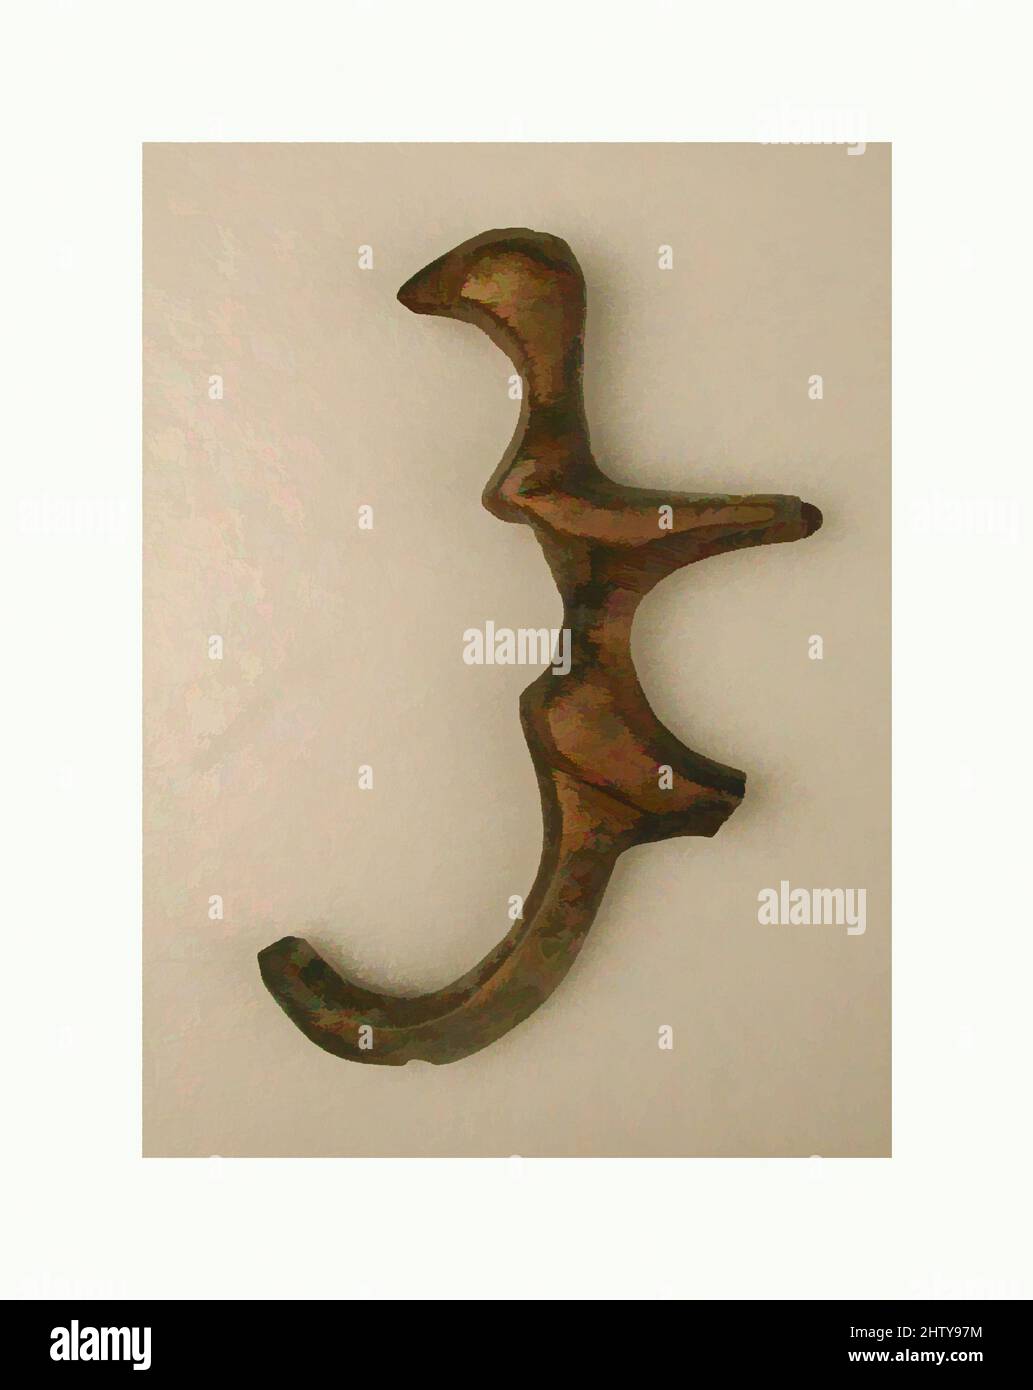 Art inspired by Hook, 9th–10th century, Excavated in Iran, Nishapur, Bronze; cast, H. 2 9/16 in. (6.5 cm), Metal, Classic works modernized by Artotop with a splash of modernity. Shapes, color and value, eye-catching visual impact on art. Emotions through freedom of artworks in a contemporary way. A timeless message pursuing a wildly creative new direction. Artists turning to the digital medium and creating the Artotop NFT Stock Photo